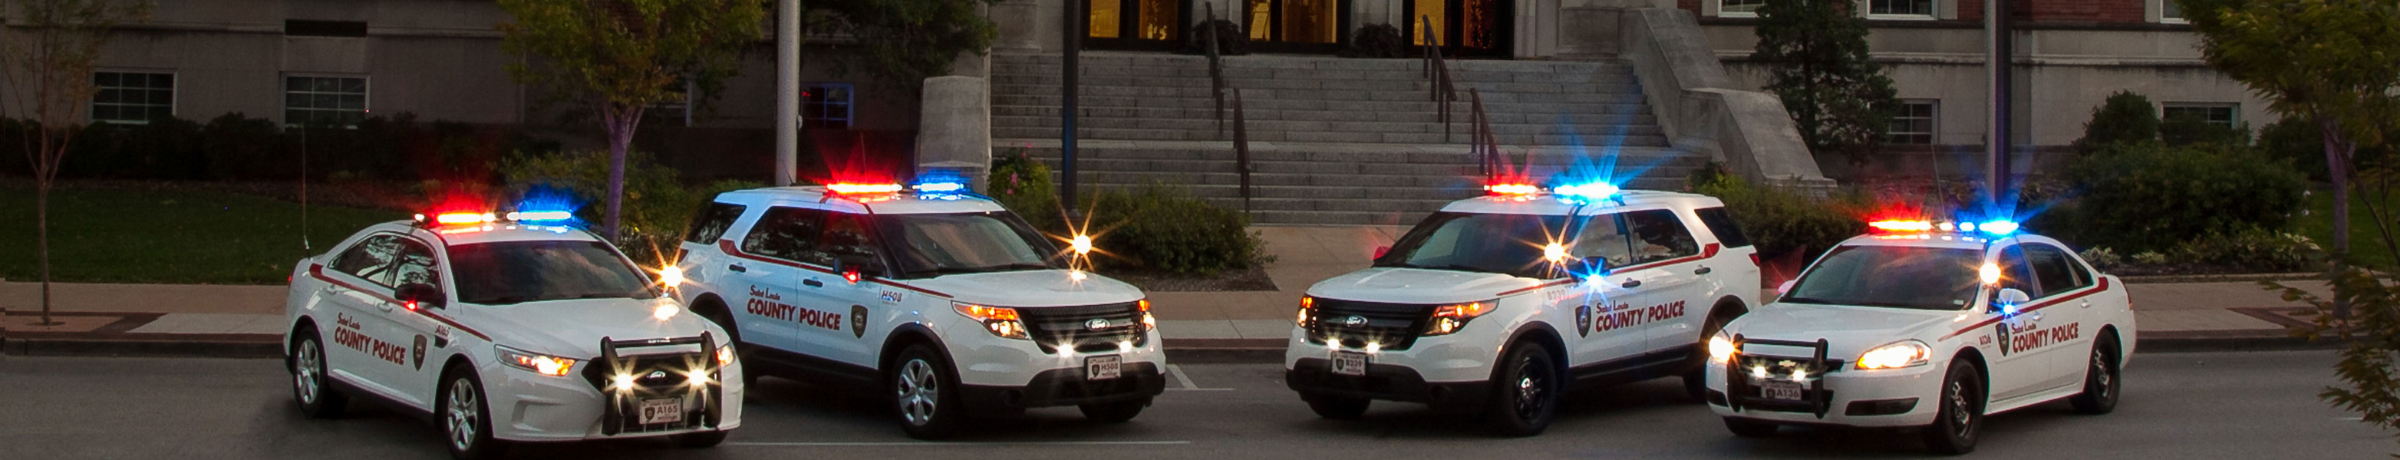 Police Cars Banner Image